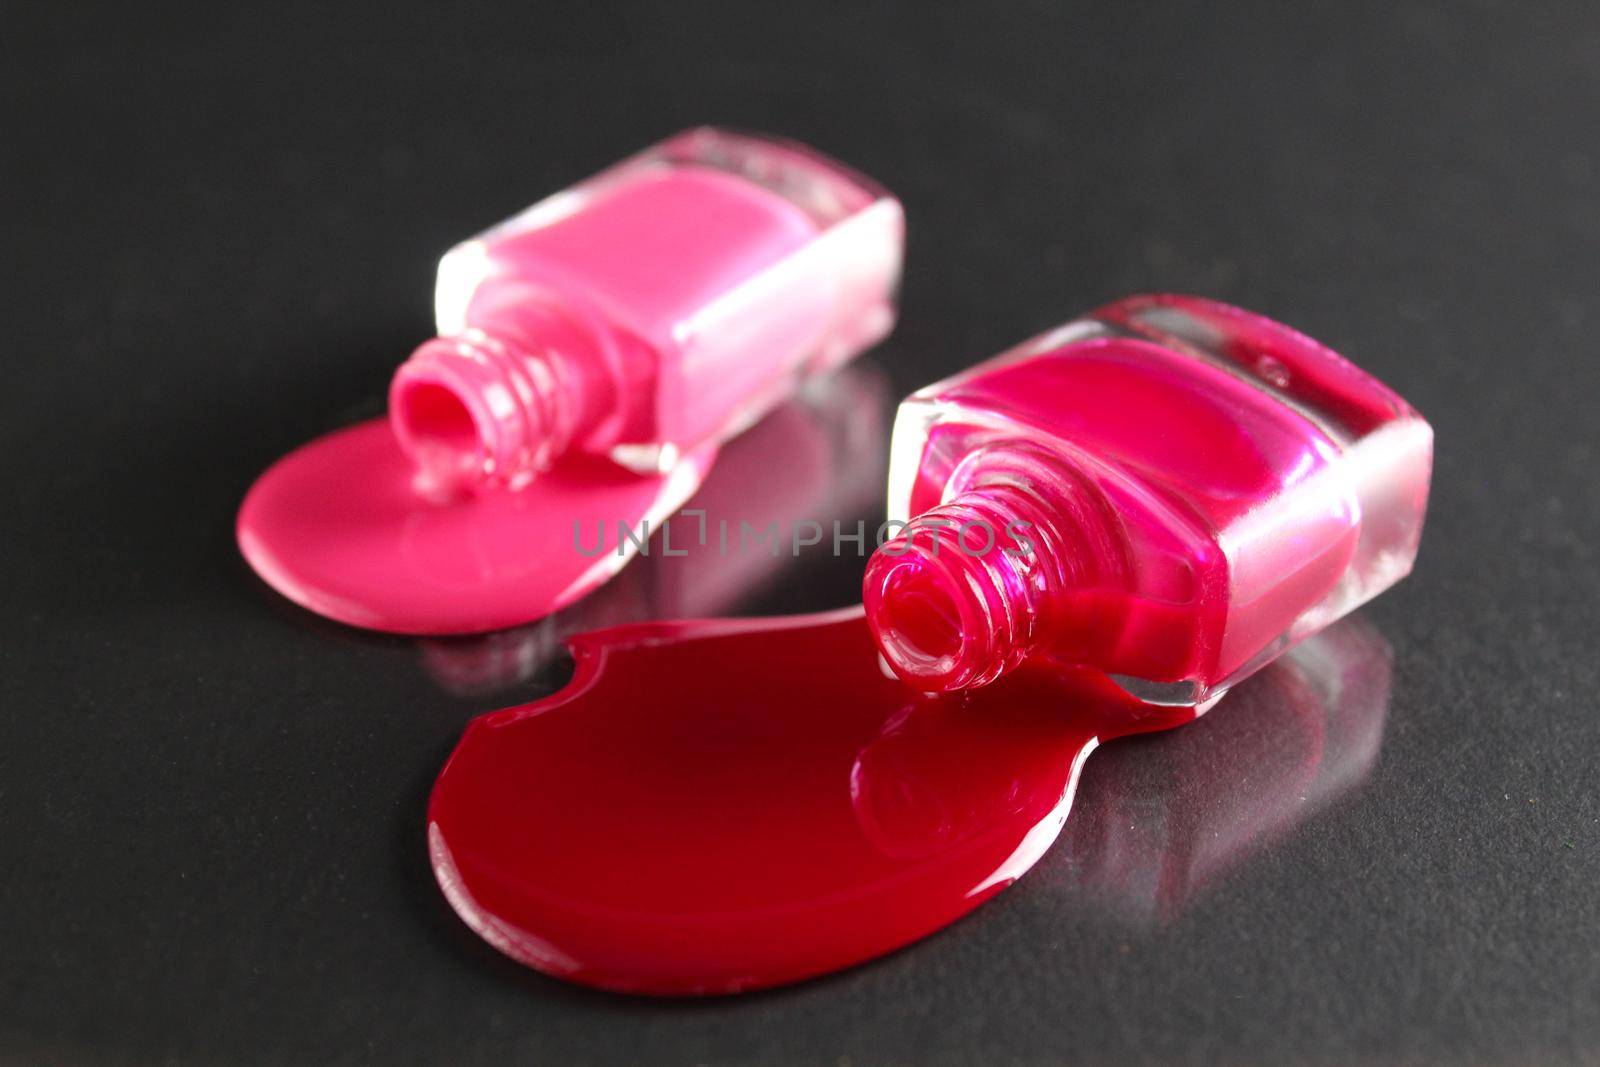 Beauty background two bottles of nail polish bottles red or burgundy pink spill poured on the table on a black background with a copyspace .